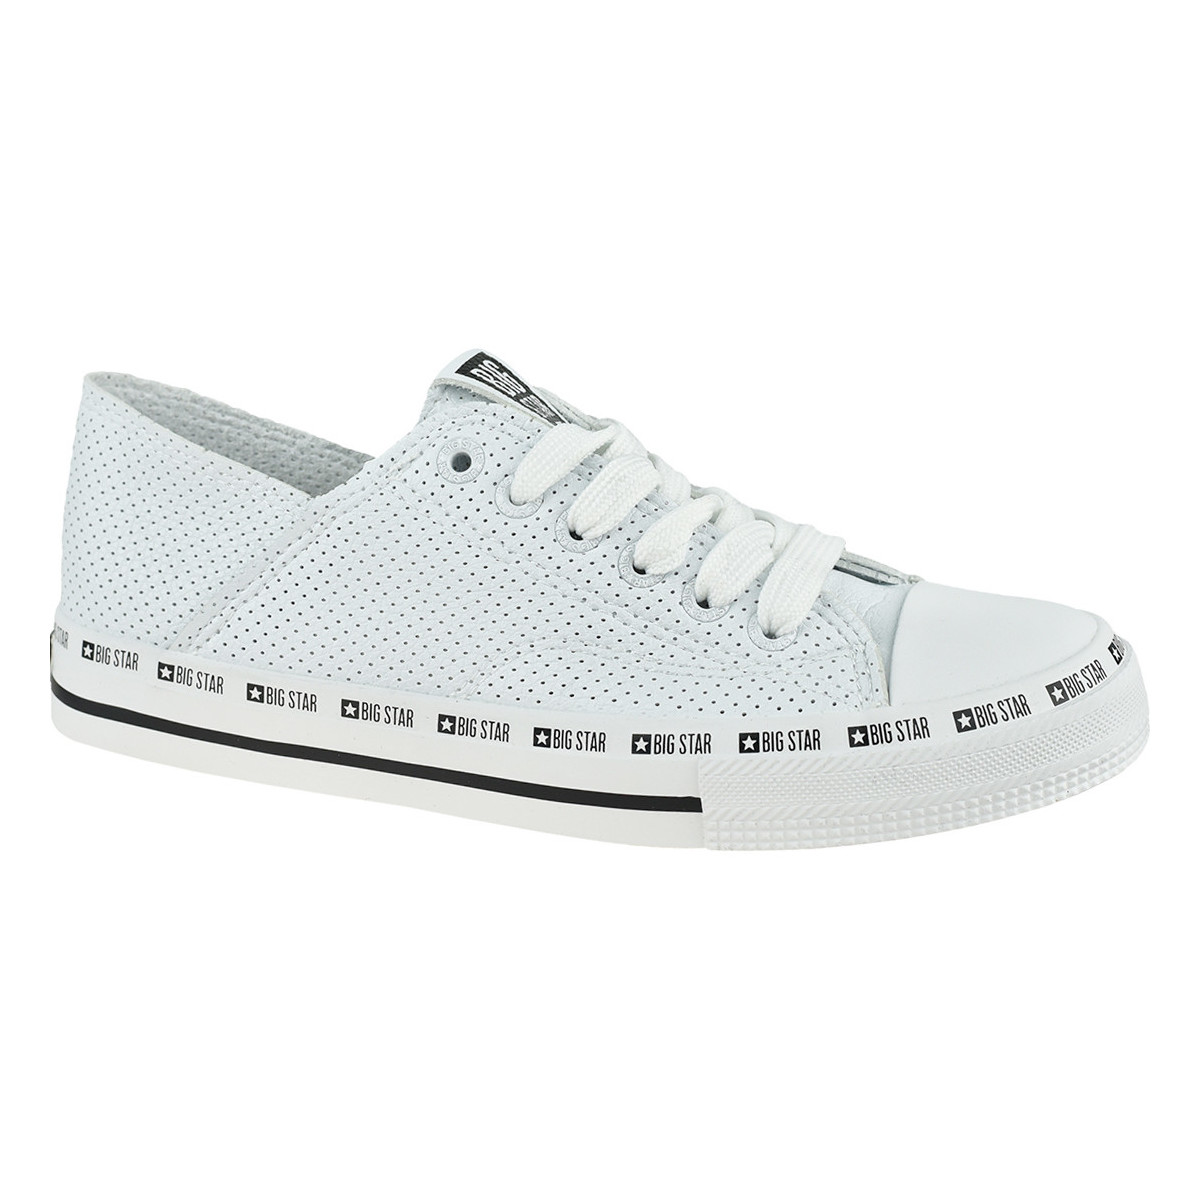 Chaussures Femme Baskets basses Big Star Shoes Blanc